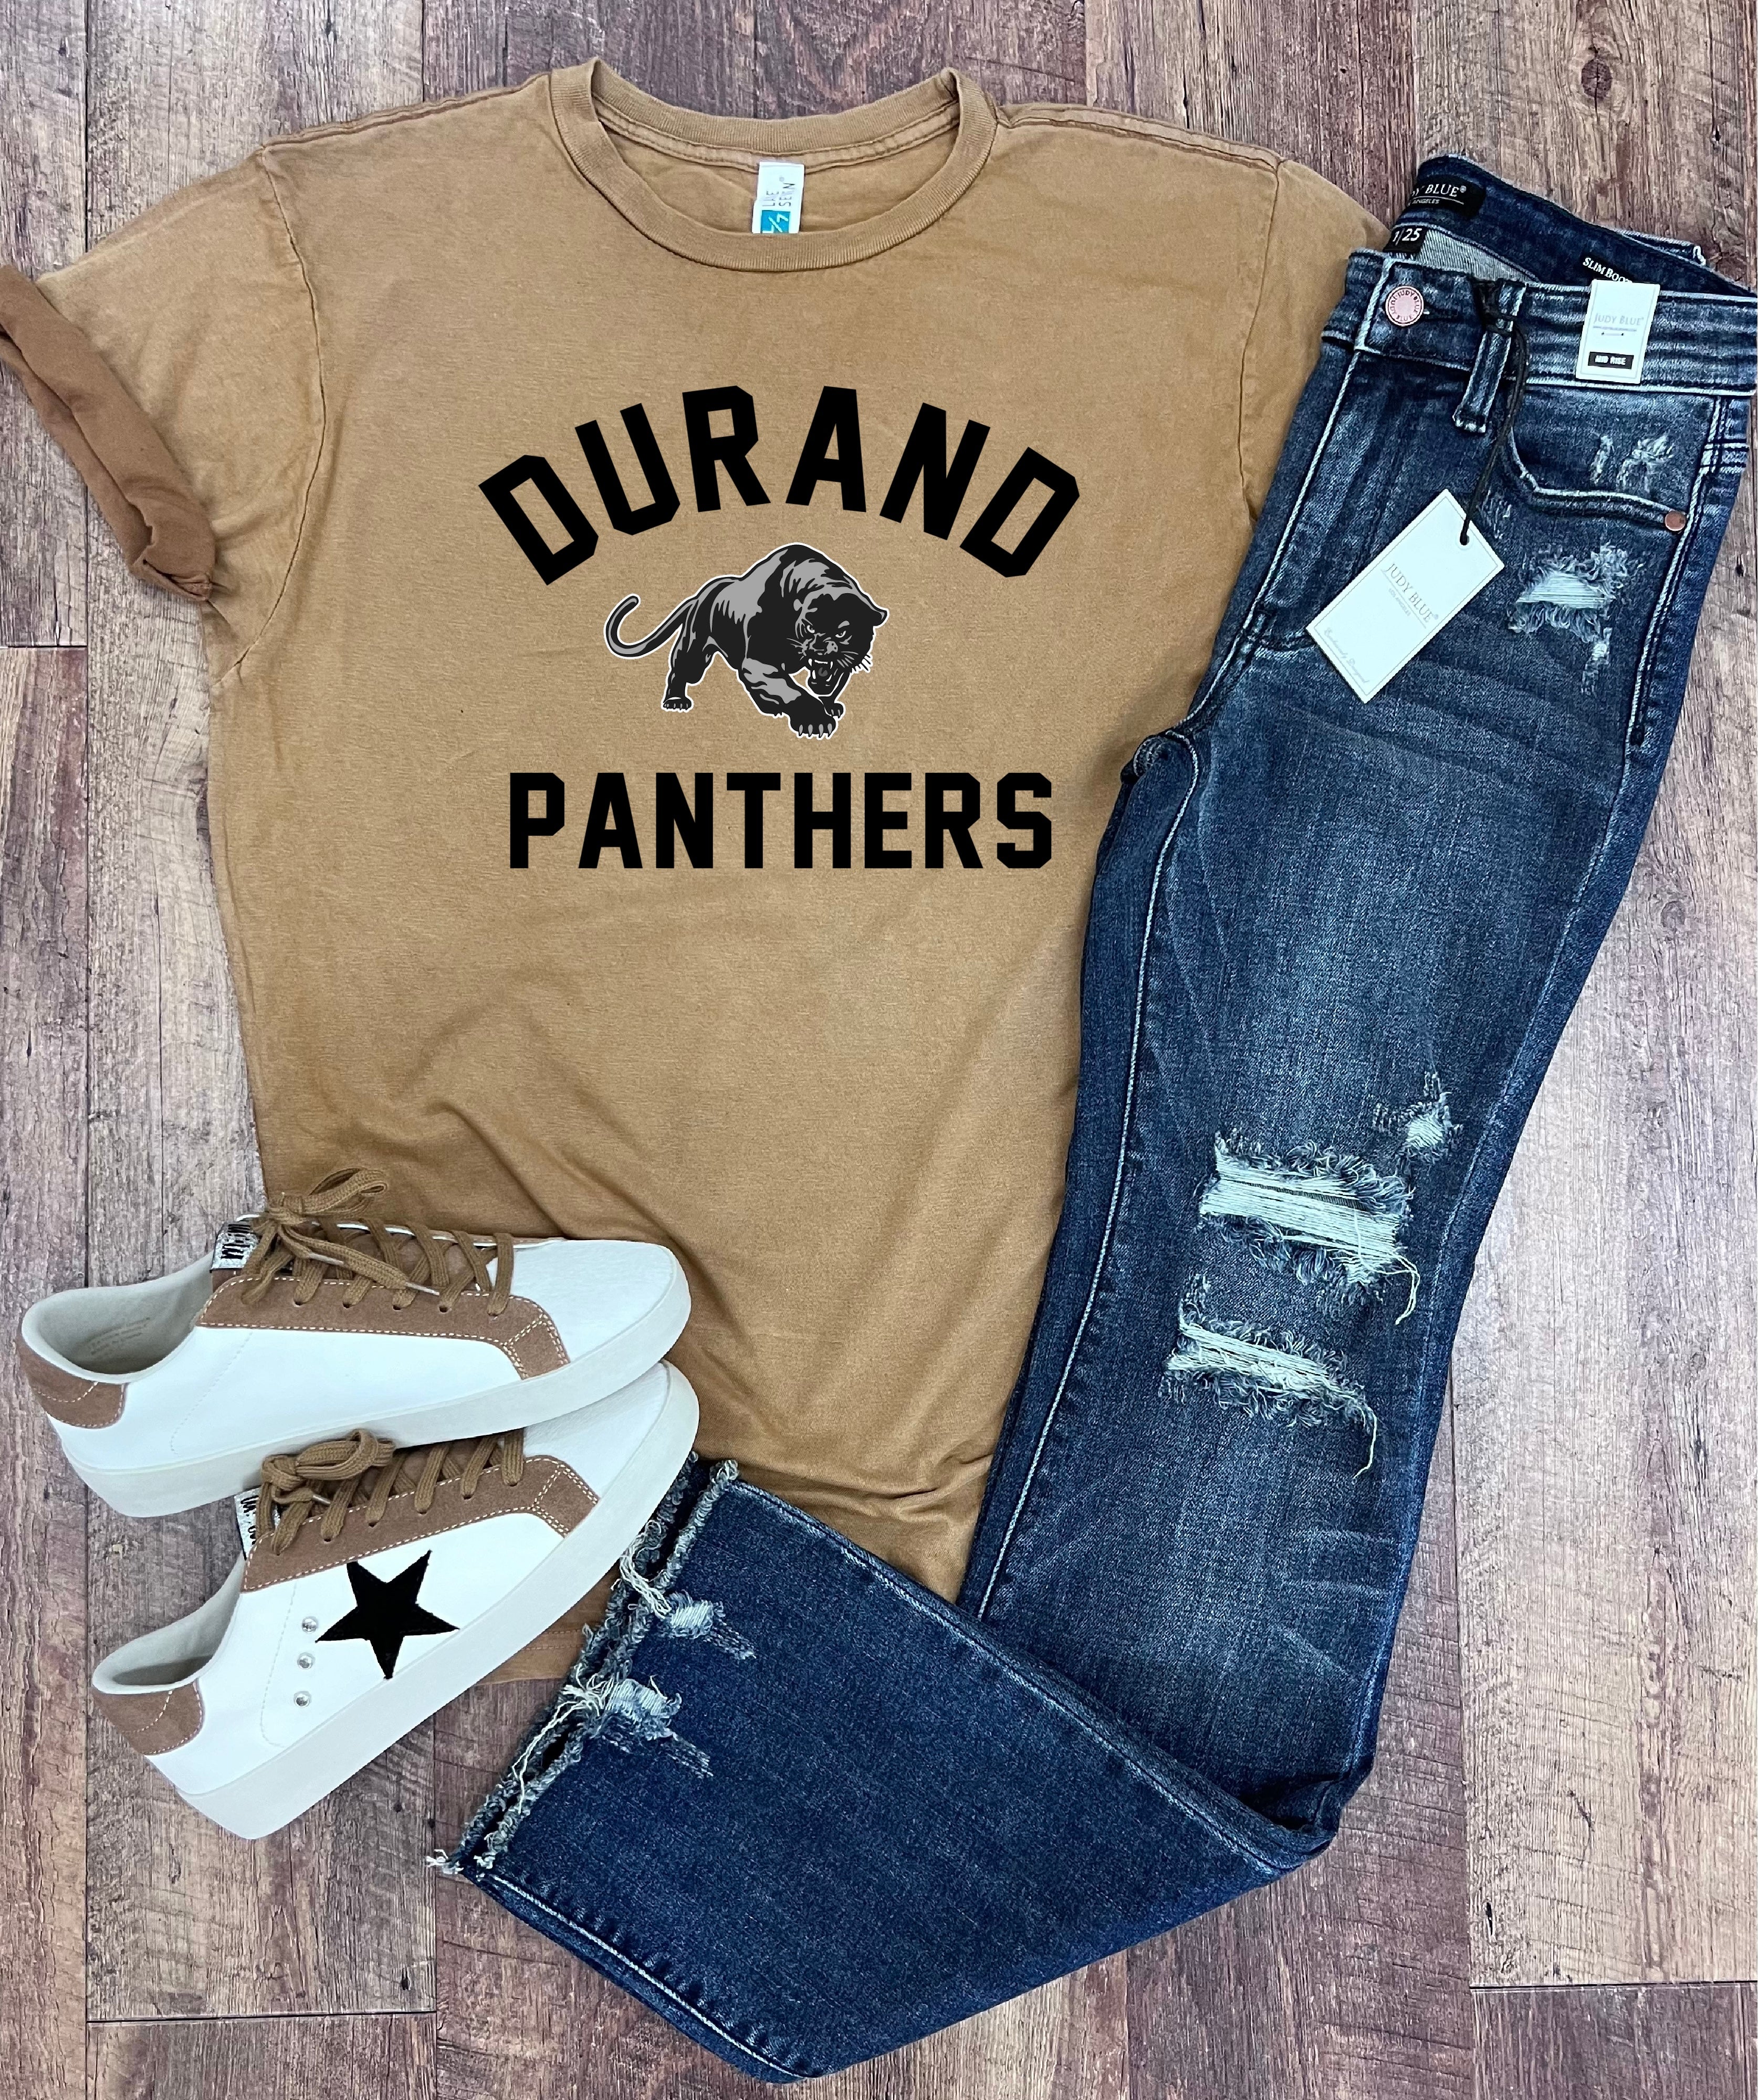 Durand Panthers Tee in Mineral Sandstone